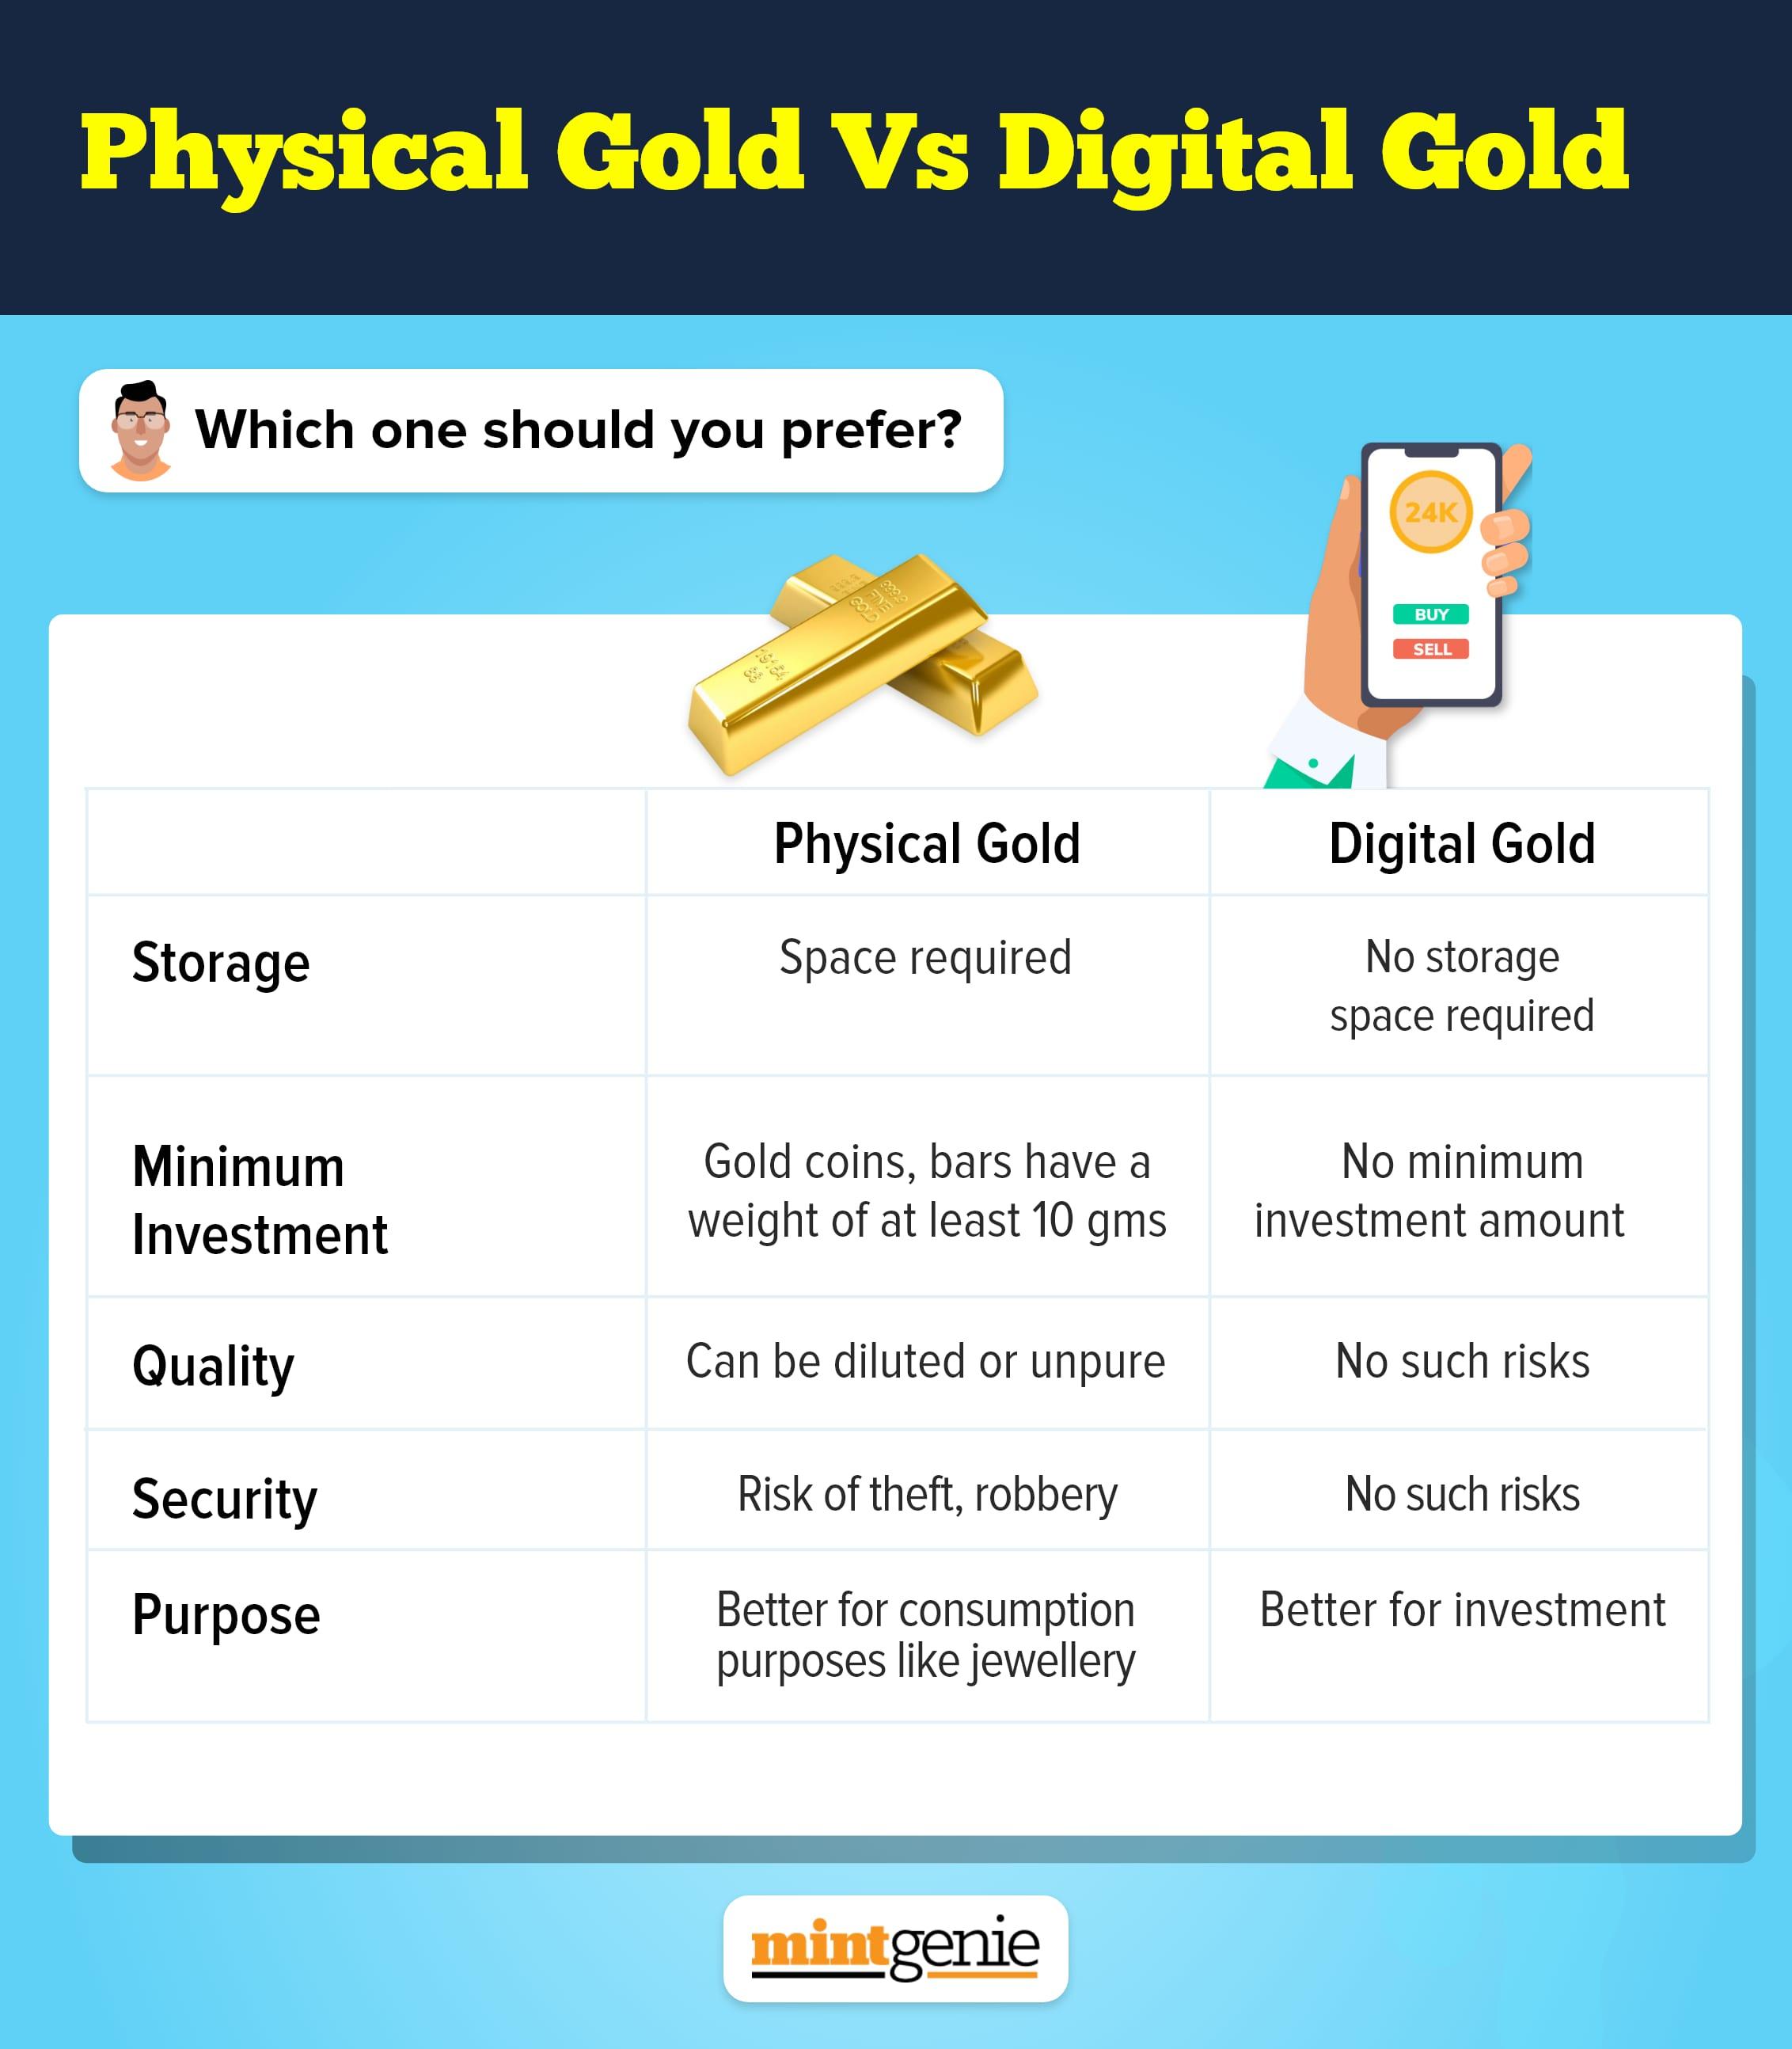 Digital gold vs physical gold: Which one should you prefer